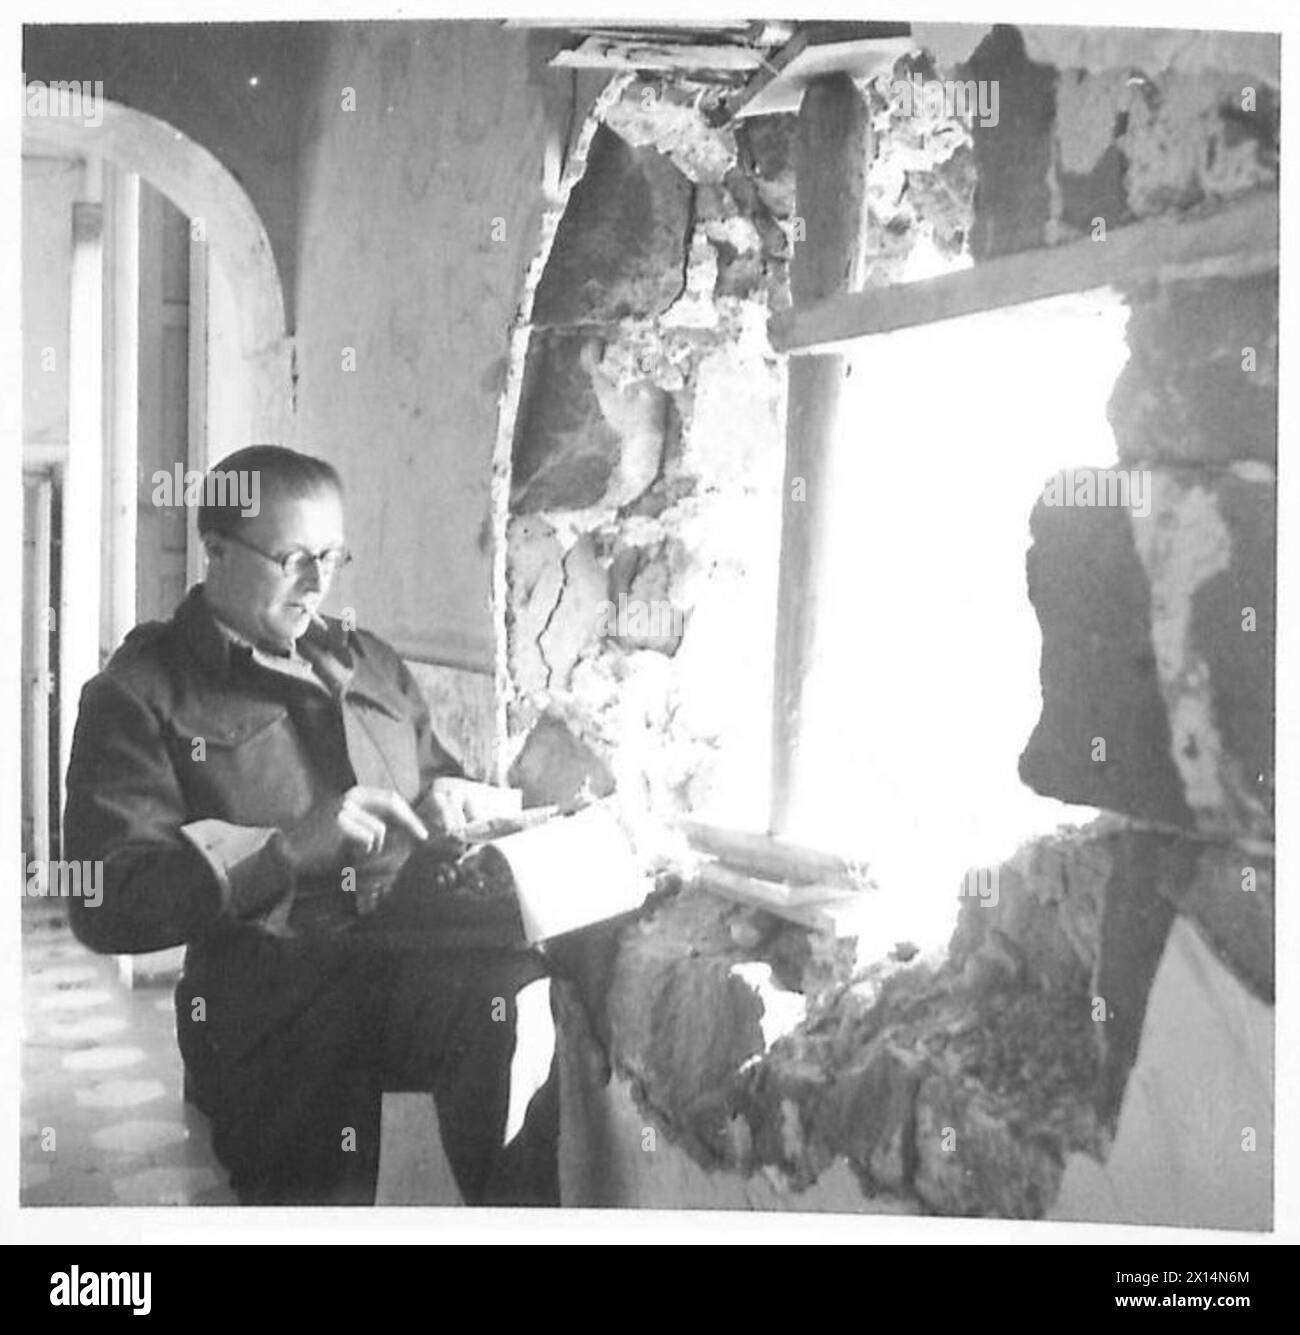 THE BRITISH ARMY IN NORTH AFRICA, SICILY, ITALY, THE BALKANS AND AUSTRIA 1942-1946 - Norman Smart of the Daily Express uses a wall as cover and the shored-up shellhole in the wall for observation purposes British Army Stock Photo